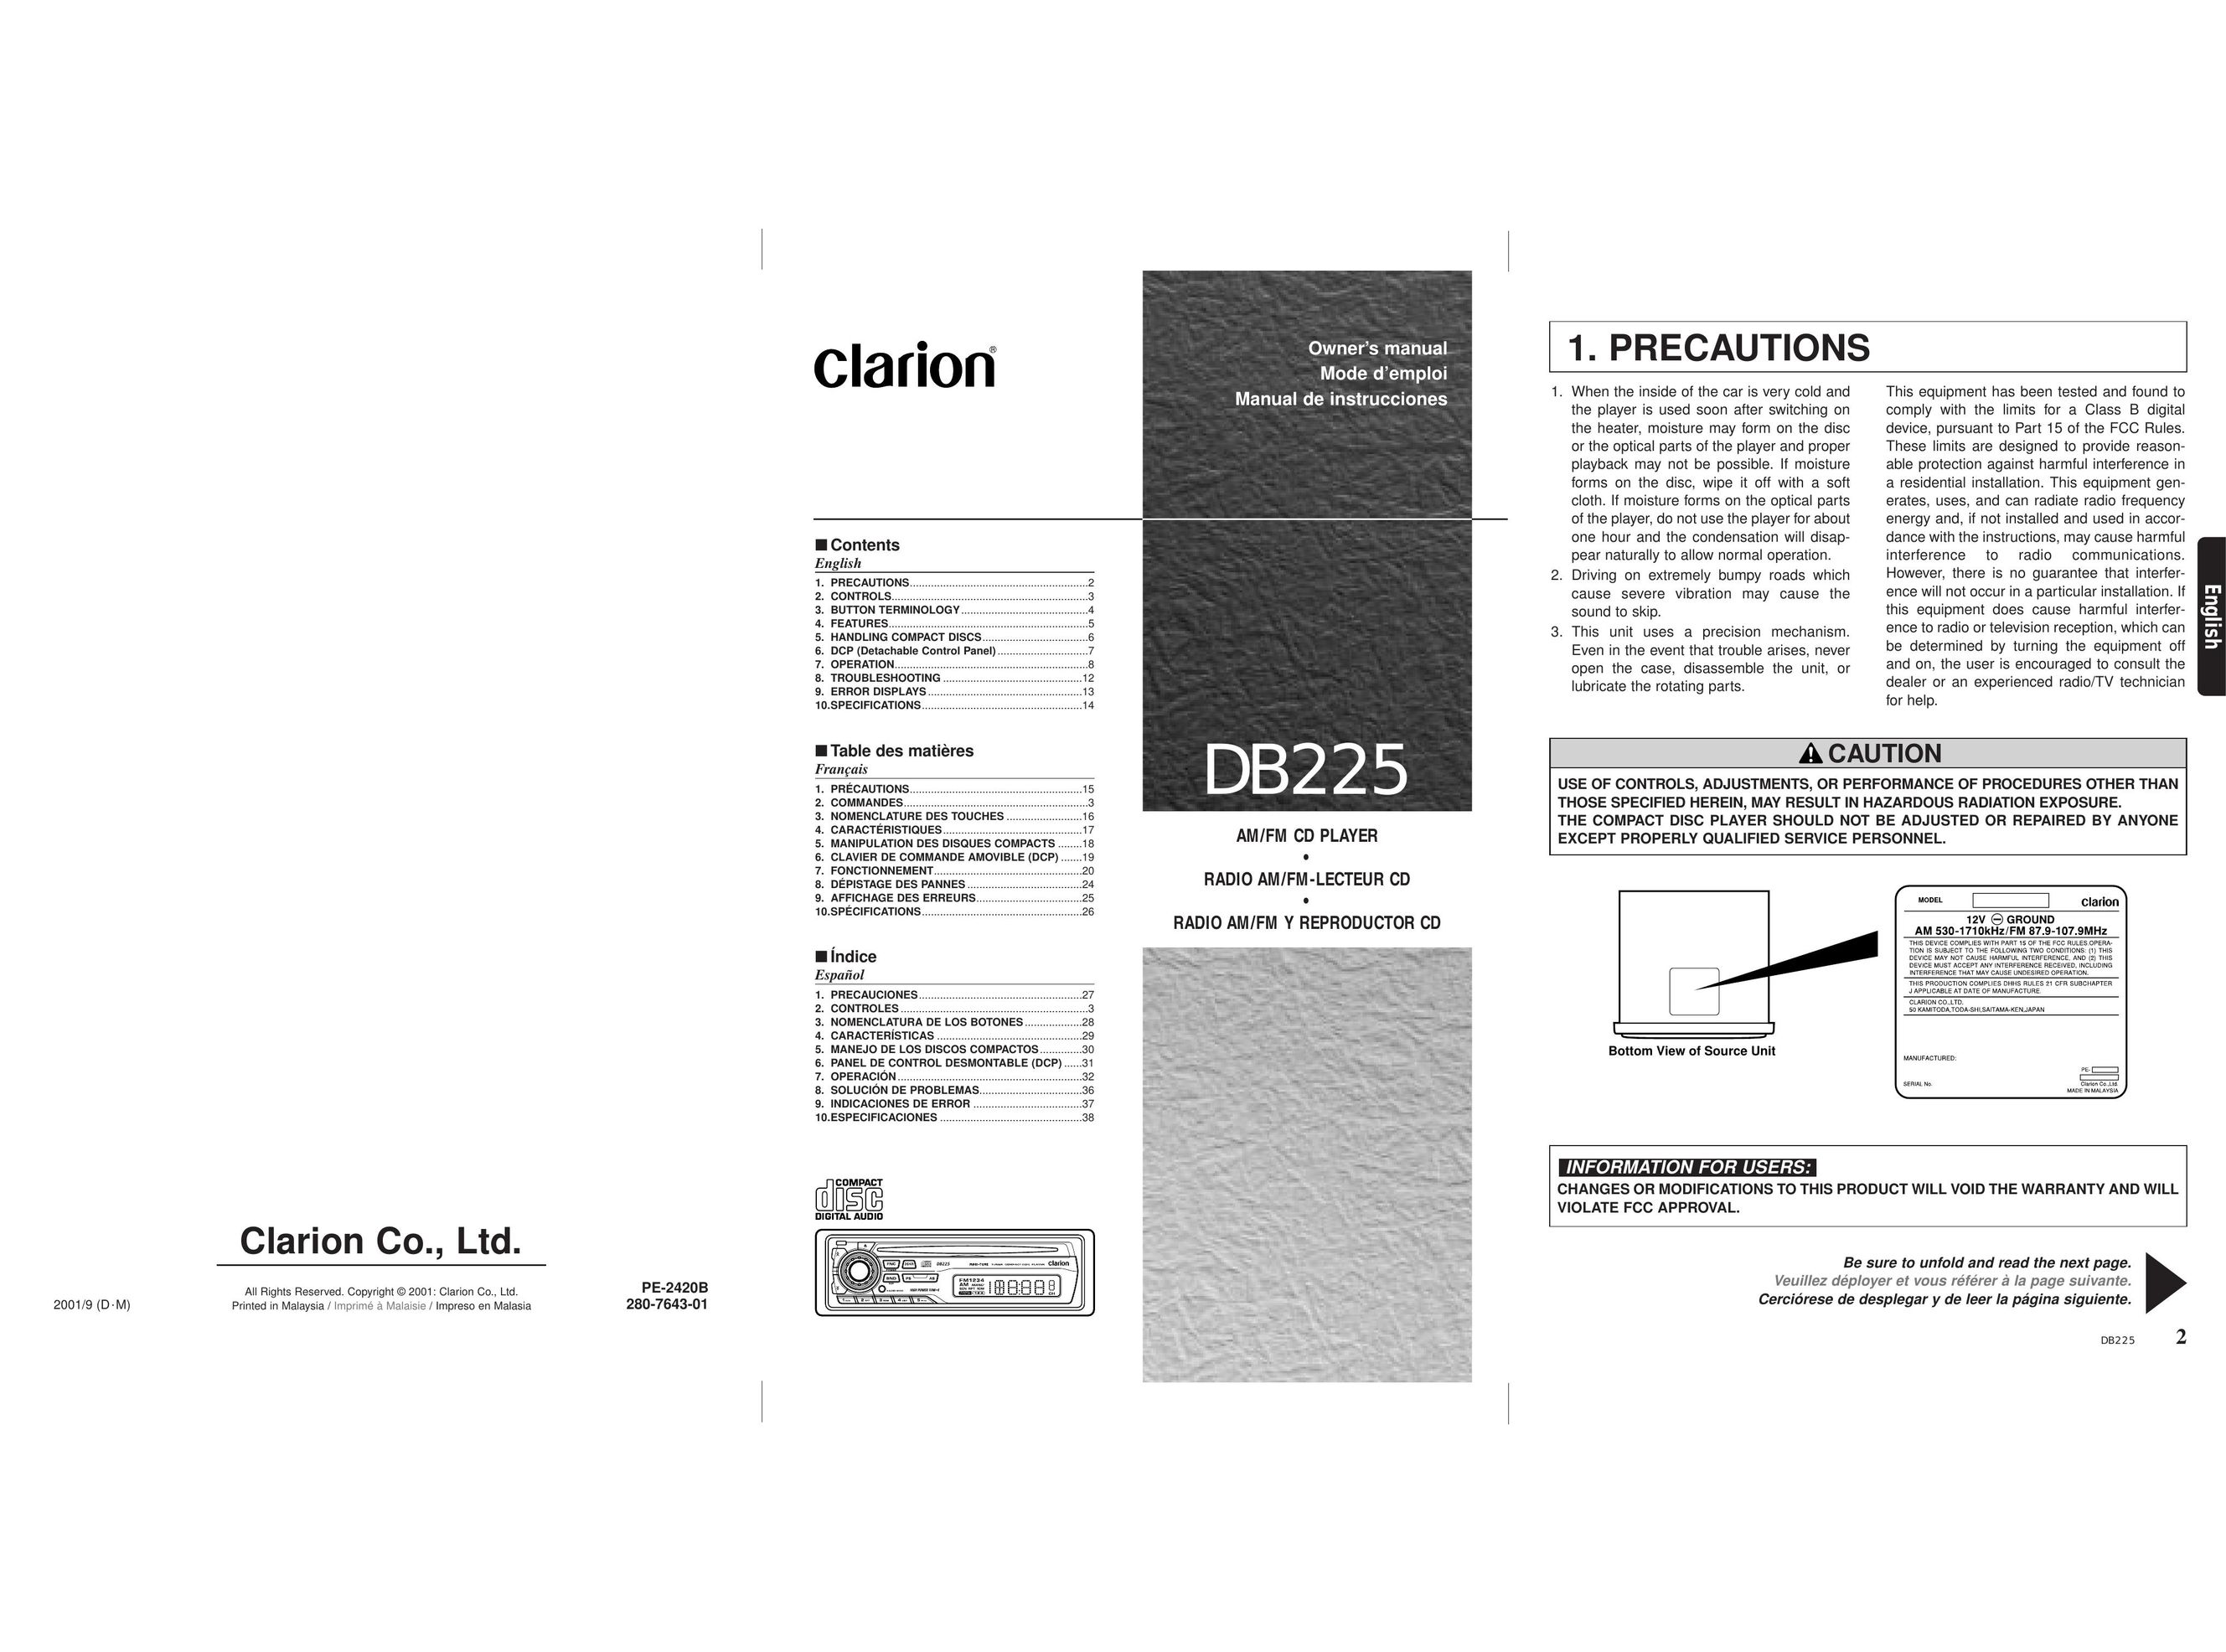 Clarion DB225 Car Stereo System User Manual